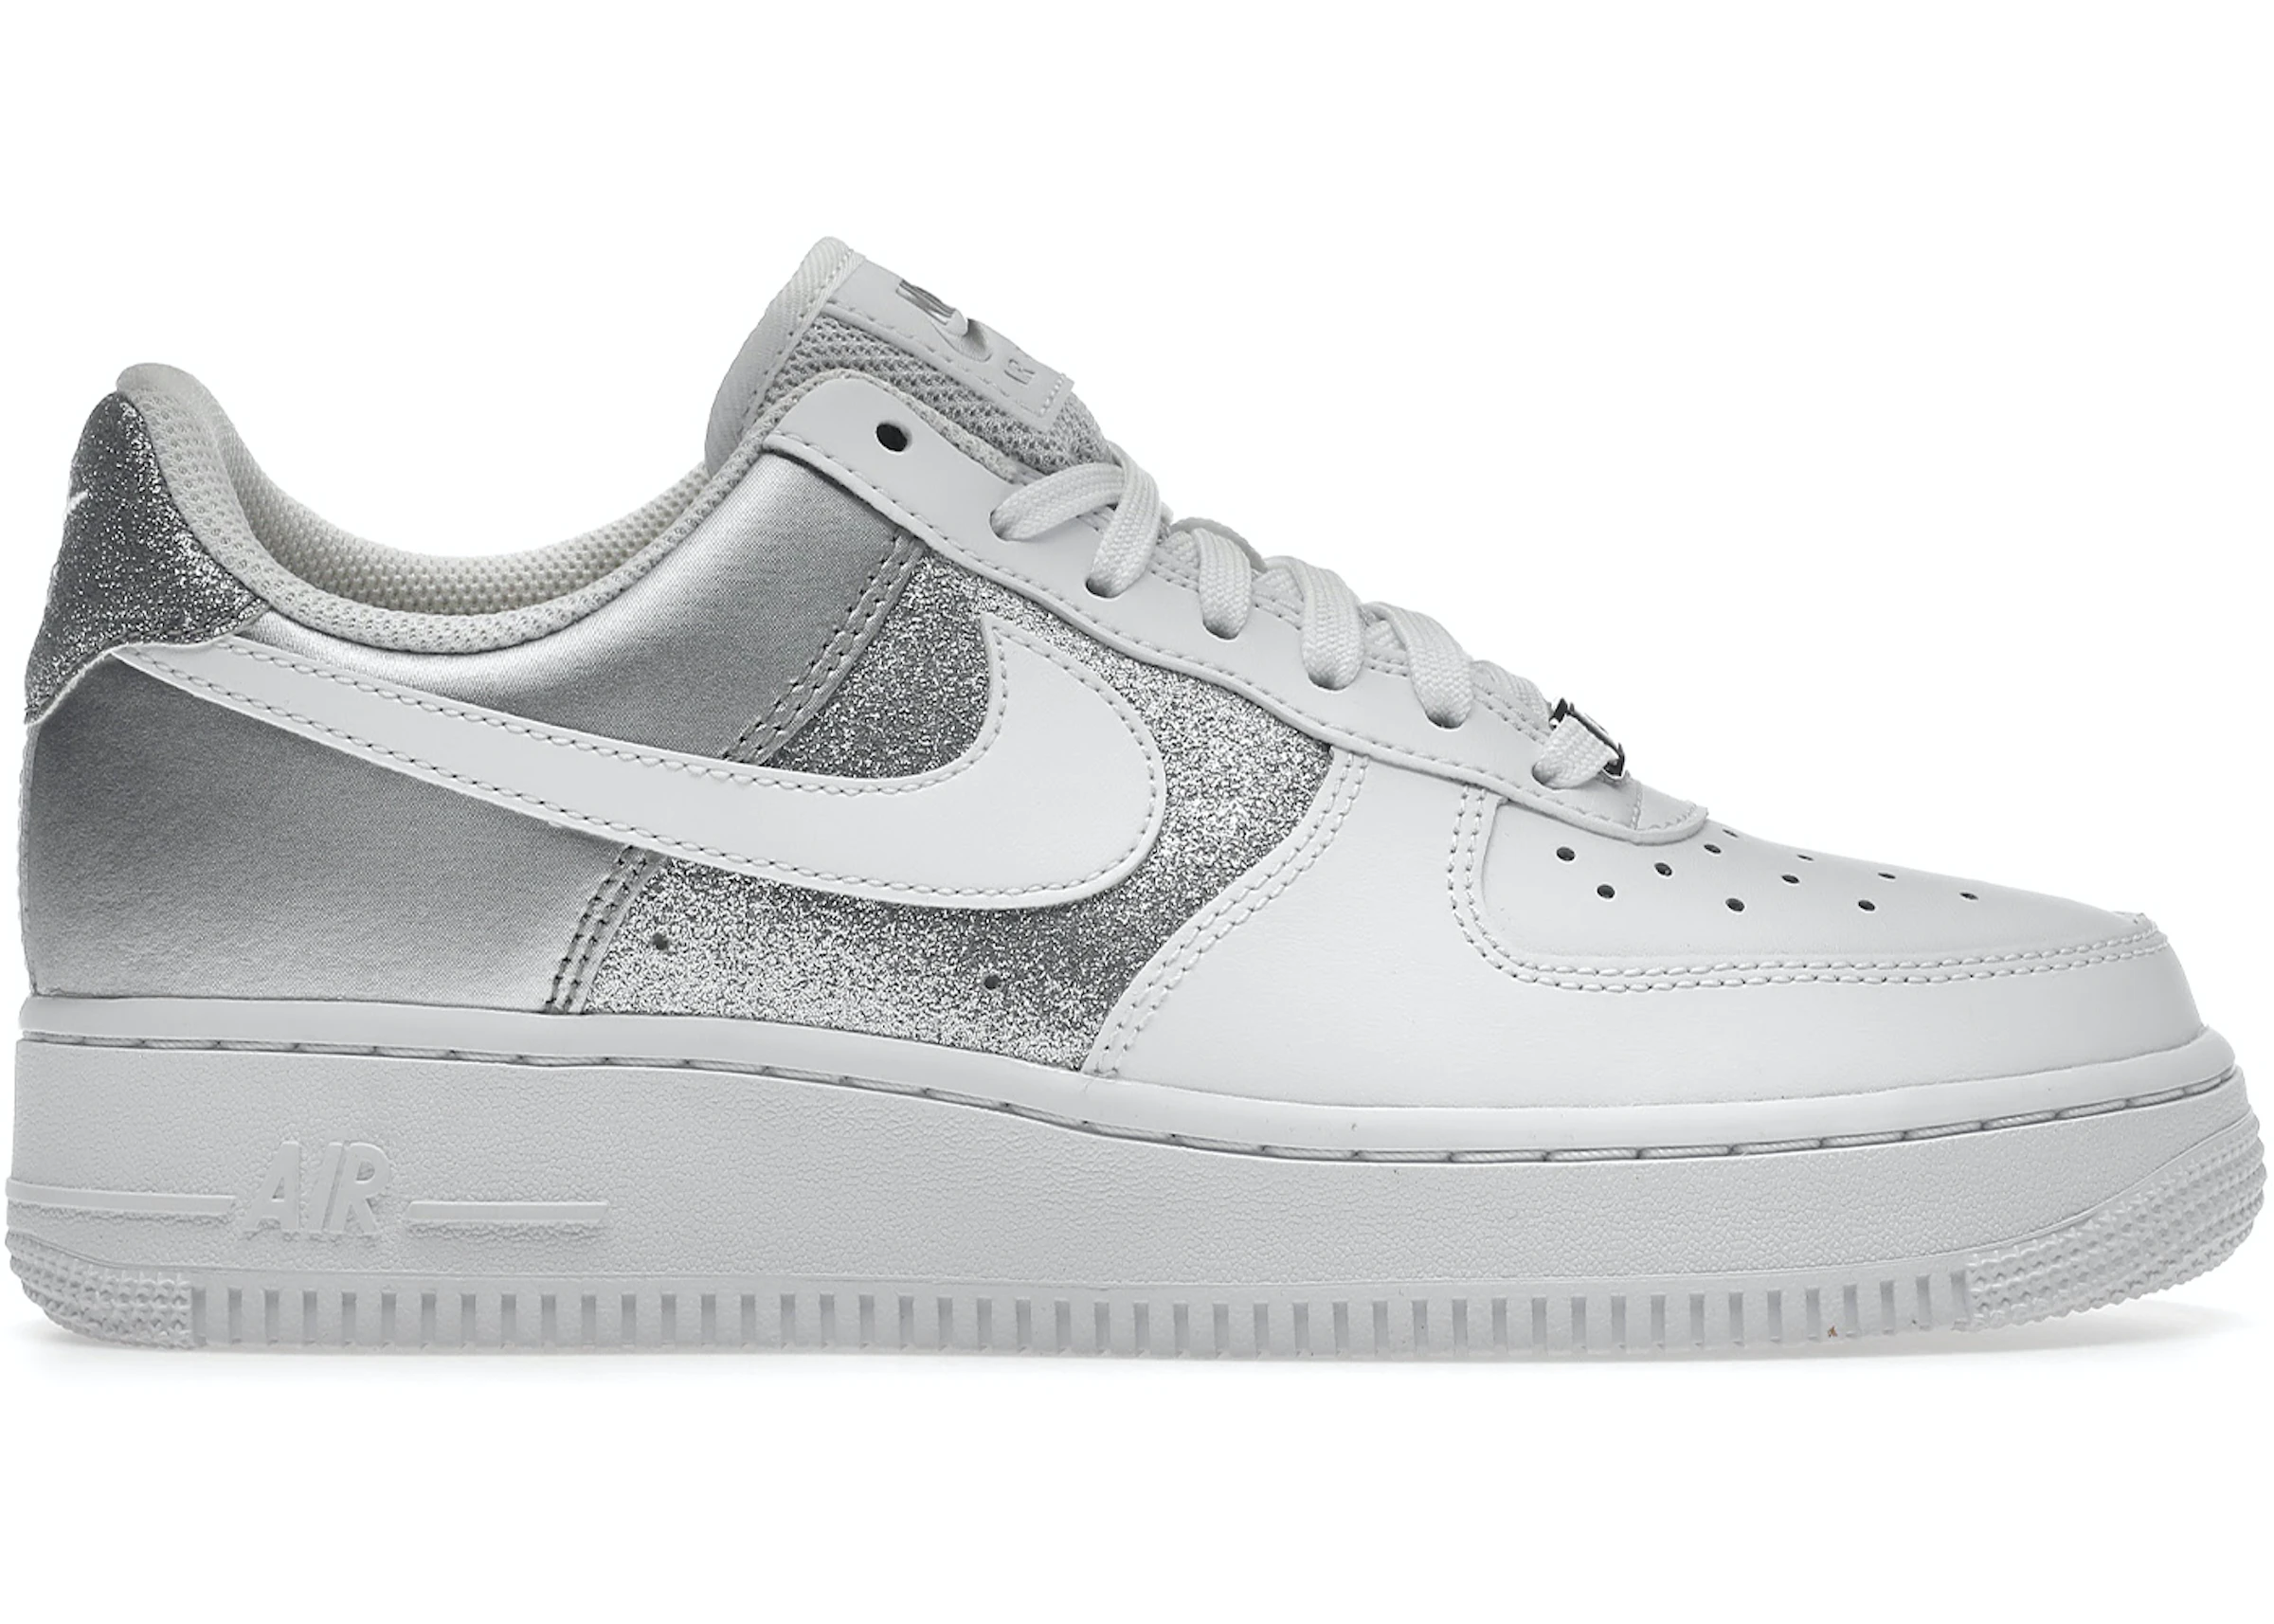 Nike Air Force 1 Low 07 White Silver (Women's) - DD6629-100 - US